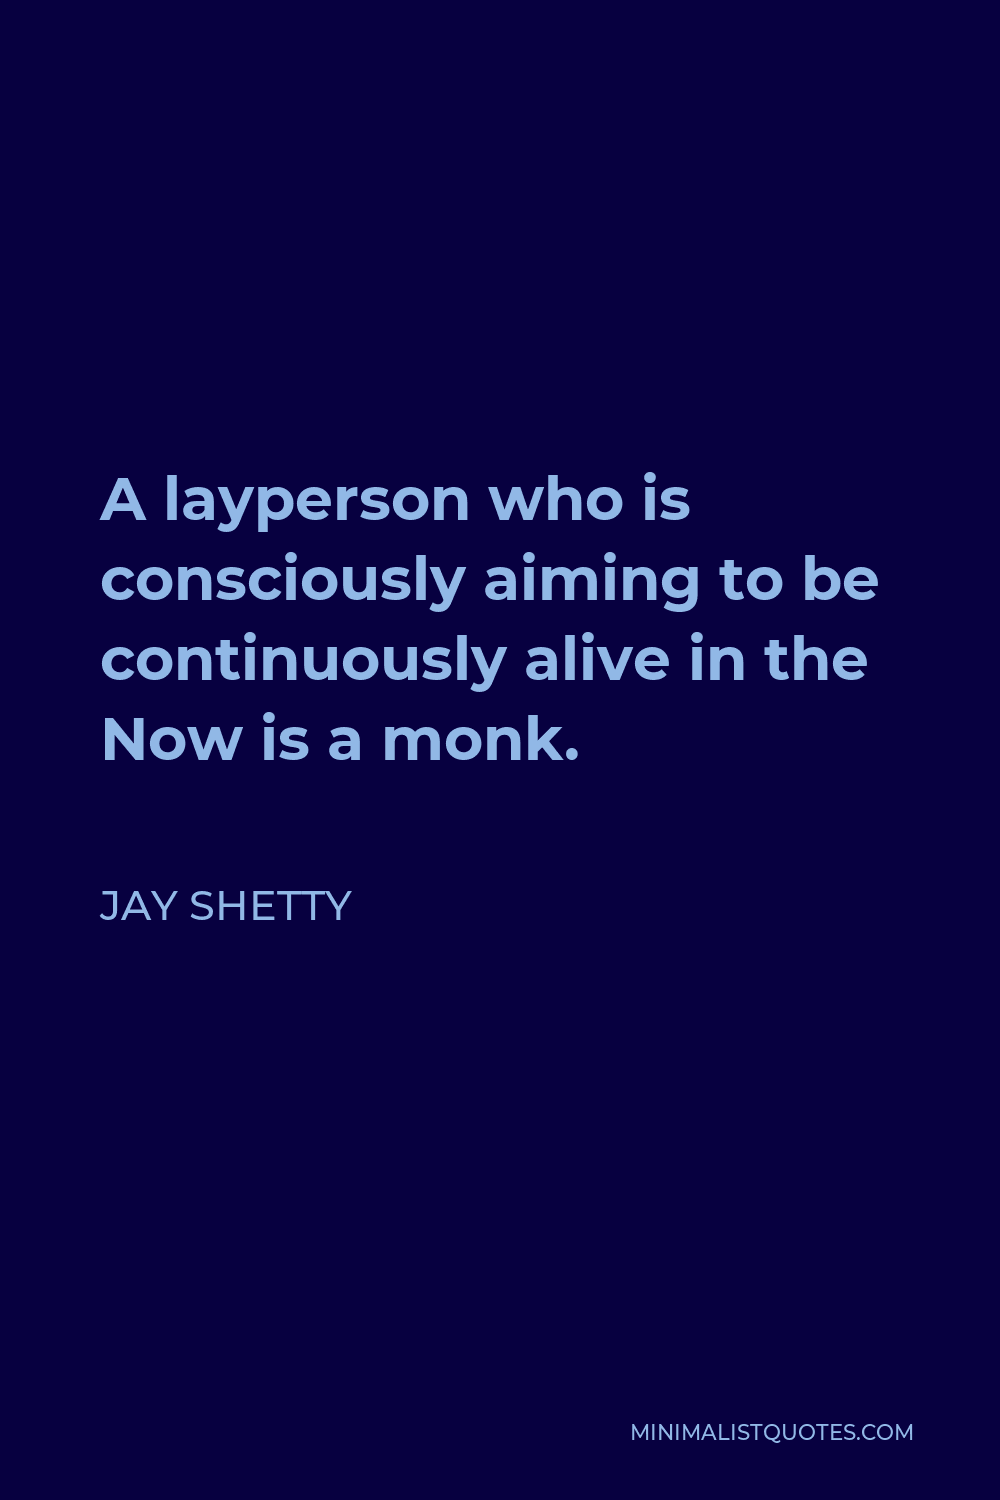 Jay Shetty Quote - A layperson who is consciously aiming to be continuously alive in the Now is a monk.